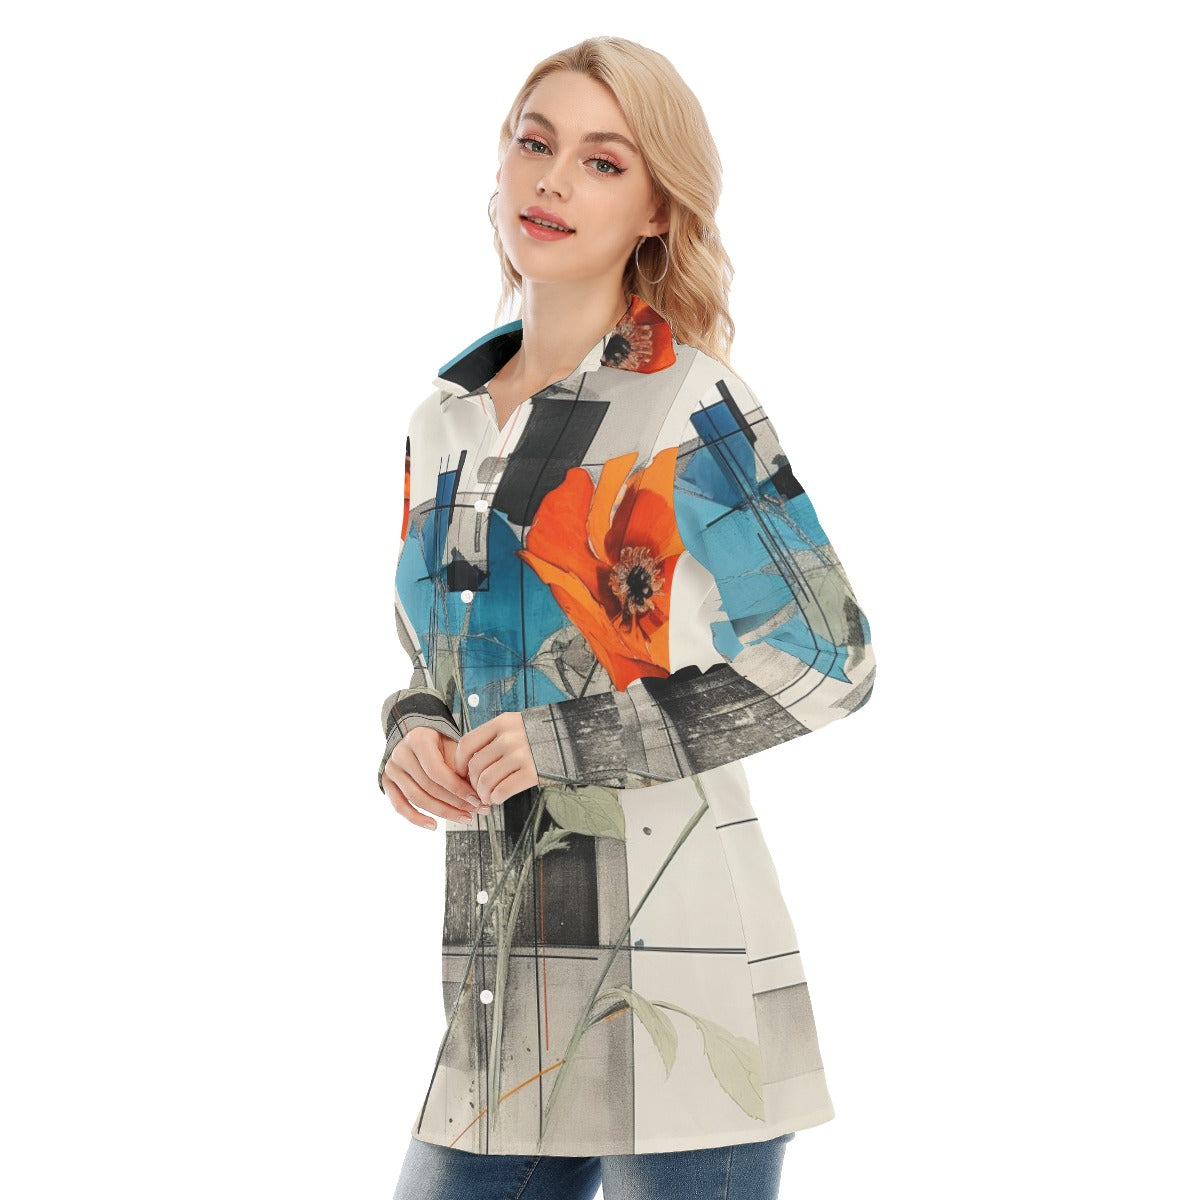 3R9GG All-Over Print Women's Long Shirt |115GSM 98% Cotton and 2% spandex